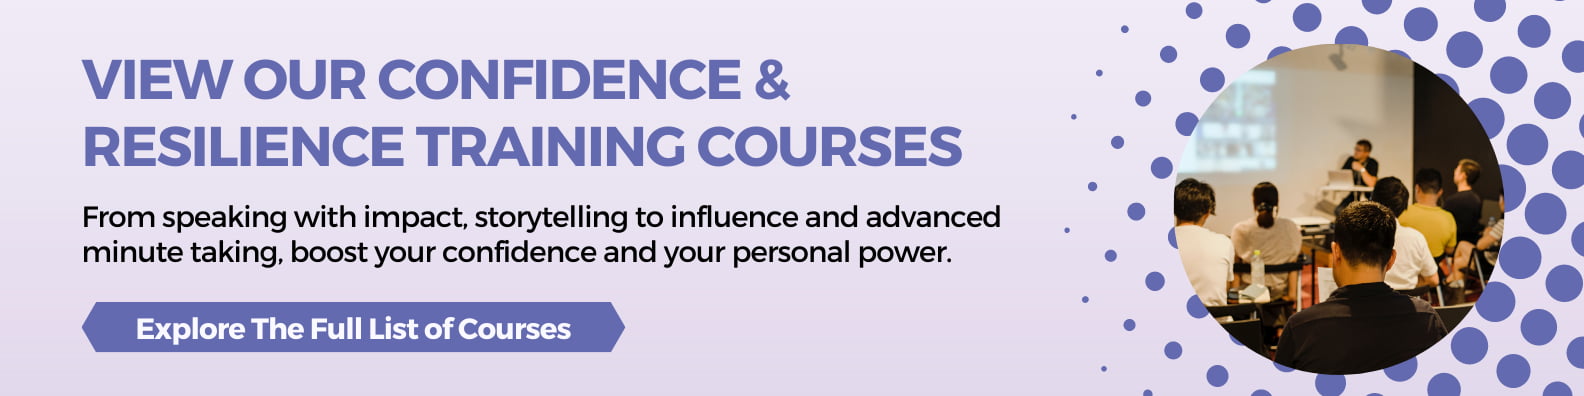 Confidence and Resilience Training Courses